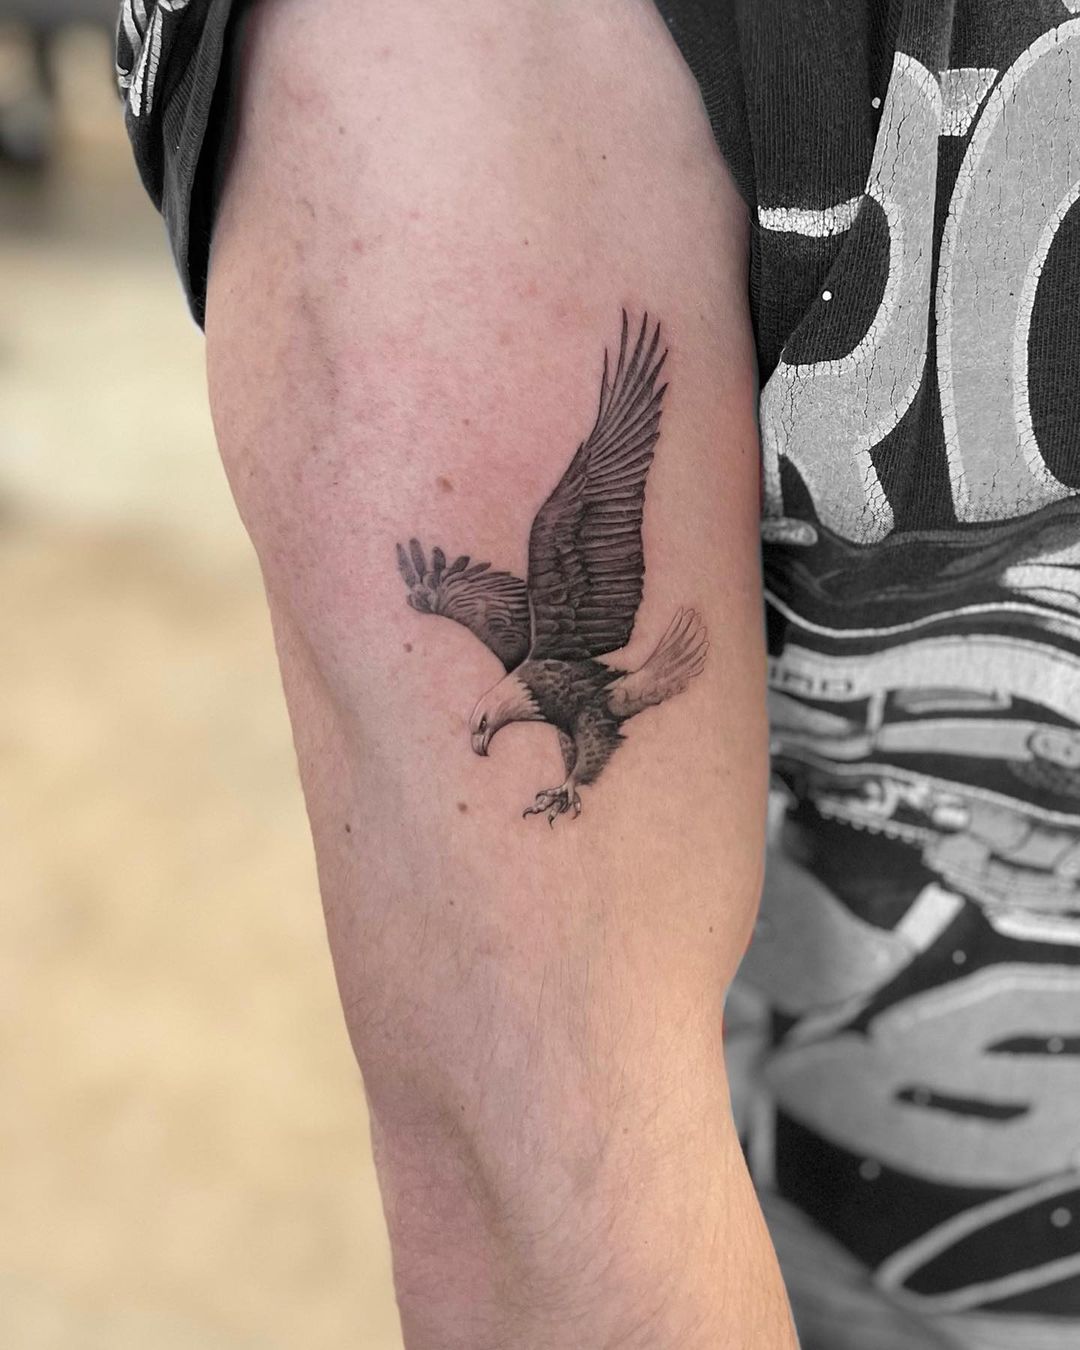 Small eagle tattoo by sirinate.s